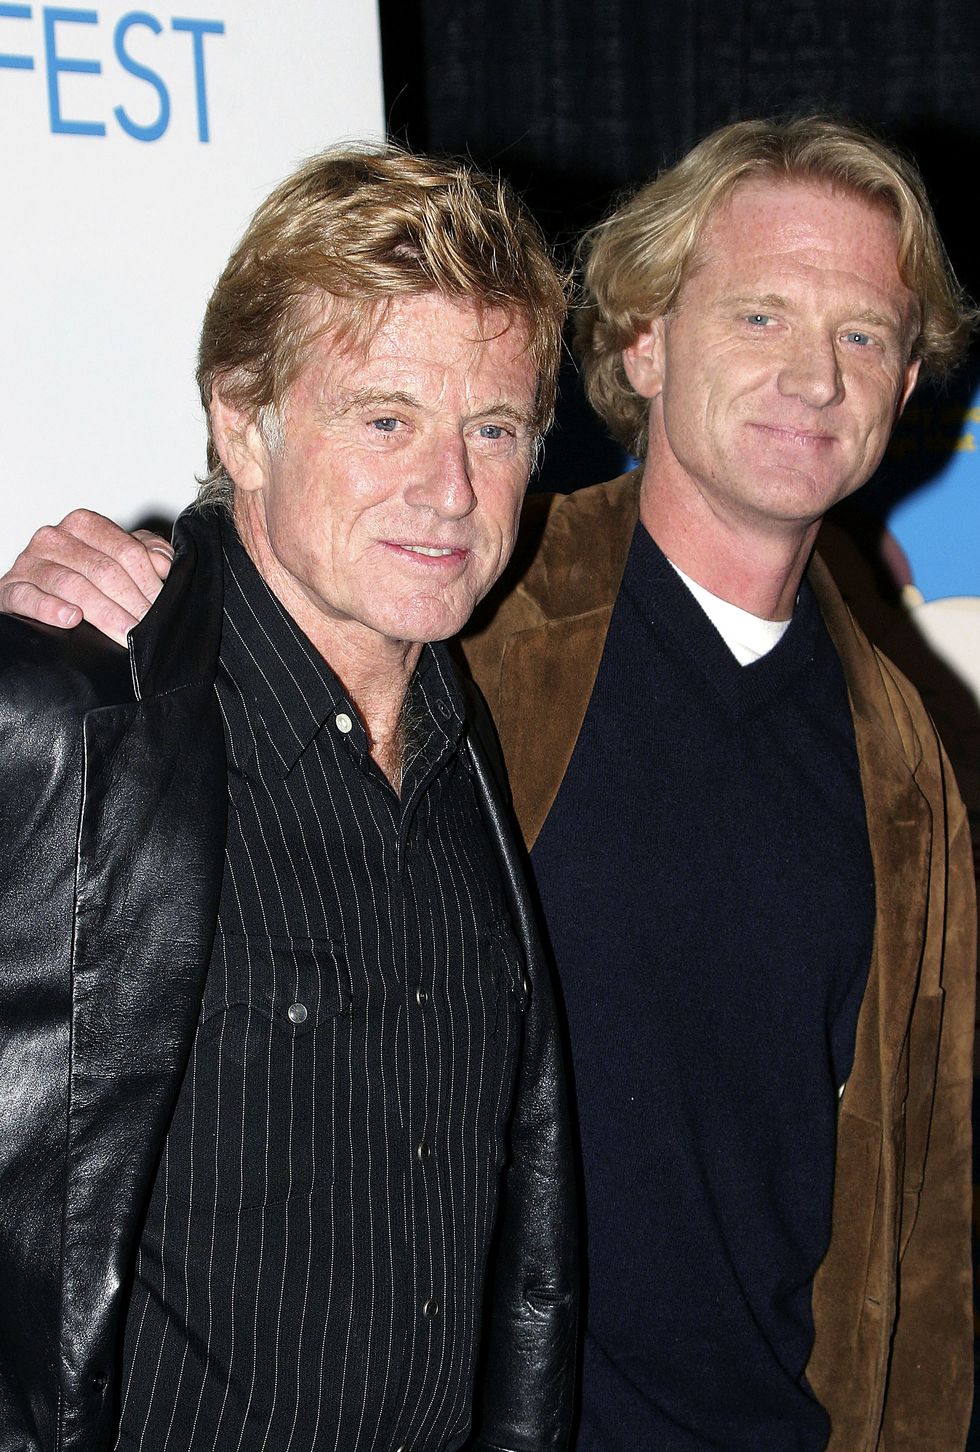 hollywood, ca   november 8  robert redford l and son james redford attend the spin screening at the afi fest on november 8, 2003 in hollywood, california  photo by giulio marcocchi getty images